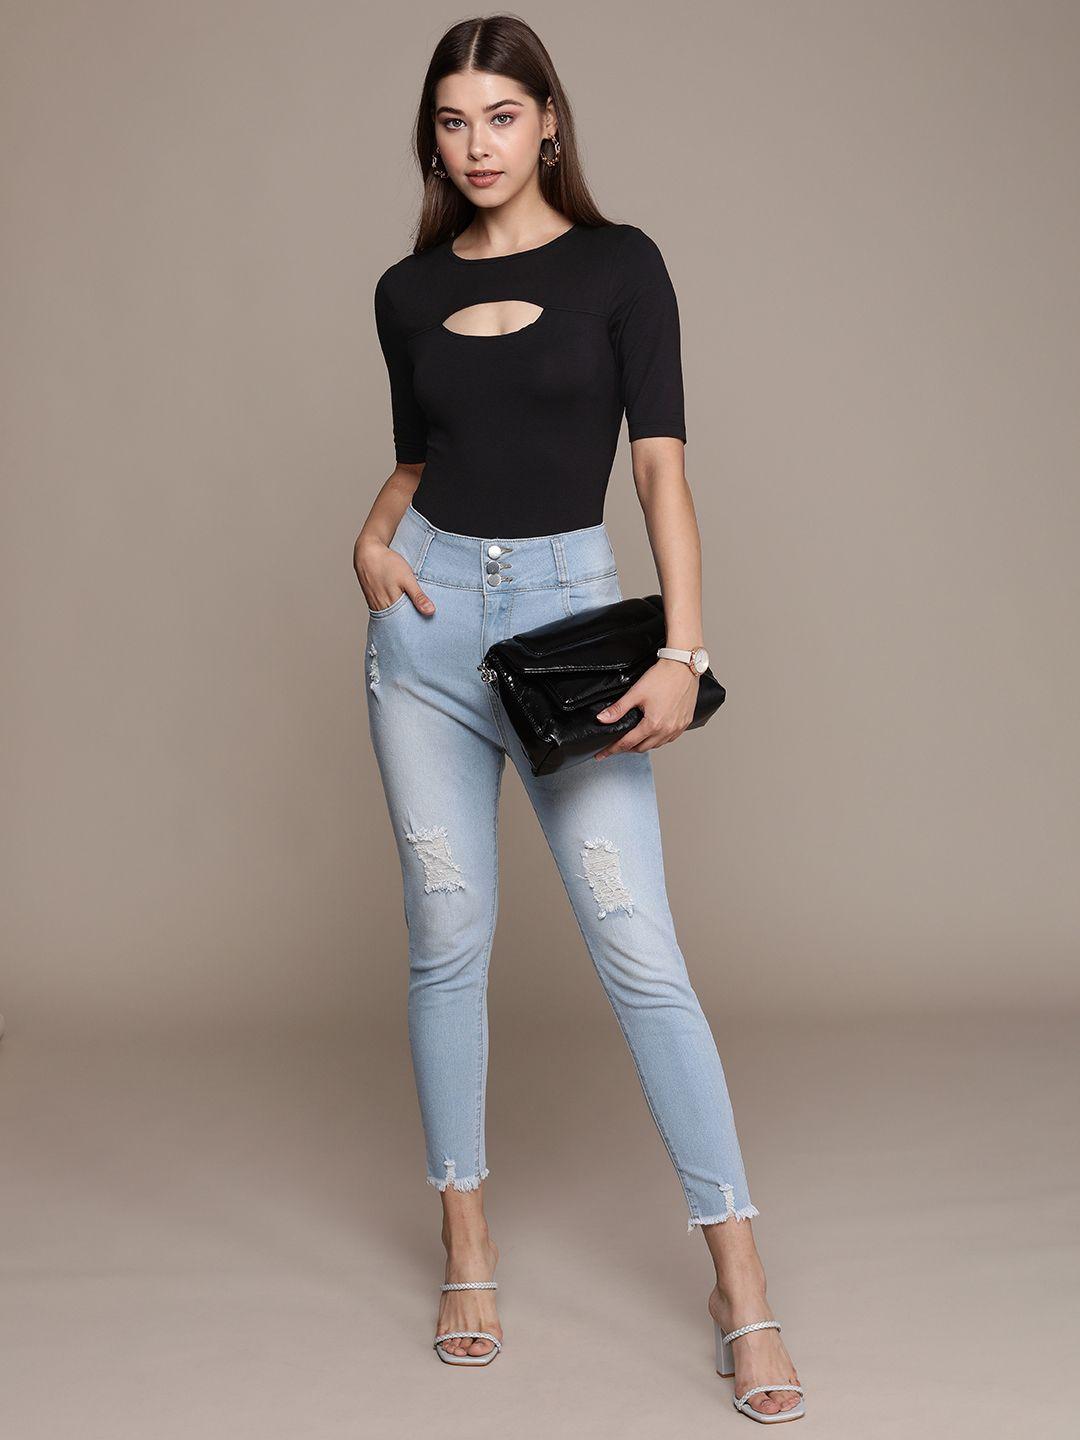 bebe women black essential solid round-neck casual t-shirt with cut-out detail